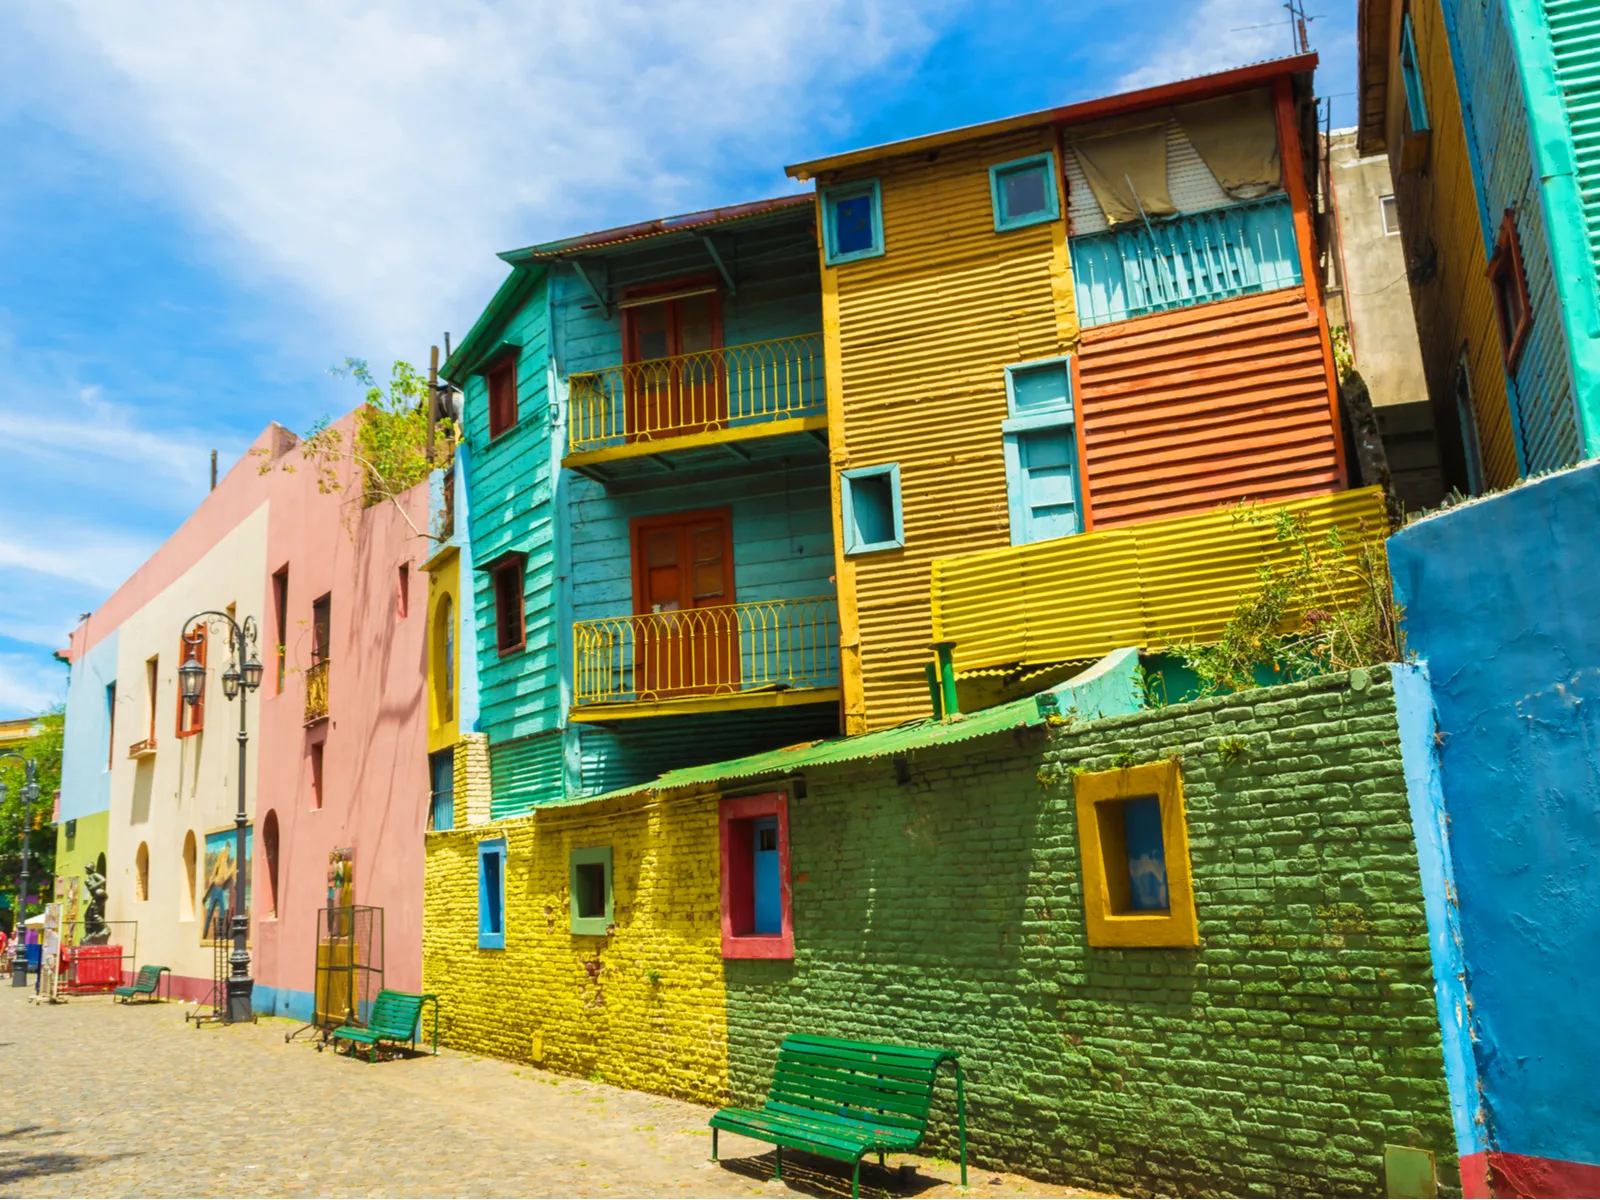 Pretty and colorful houses in Caminito pictured during the best time to visit Argentina